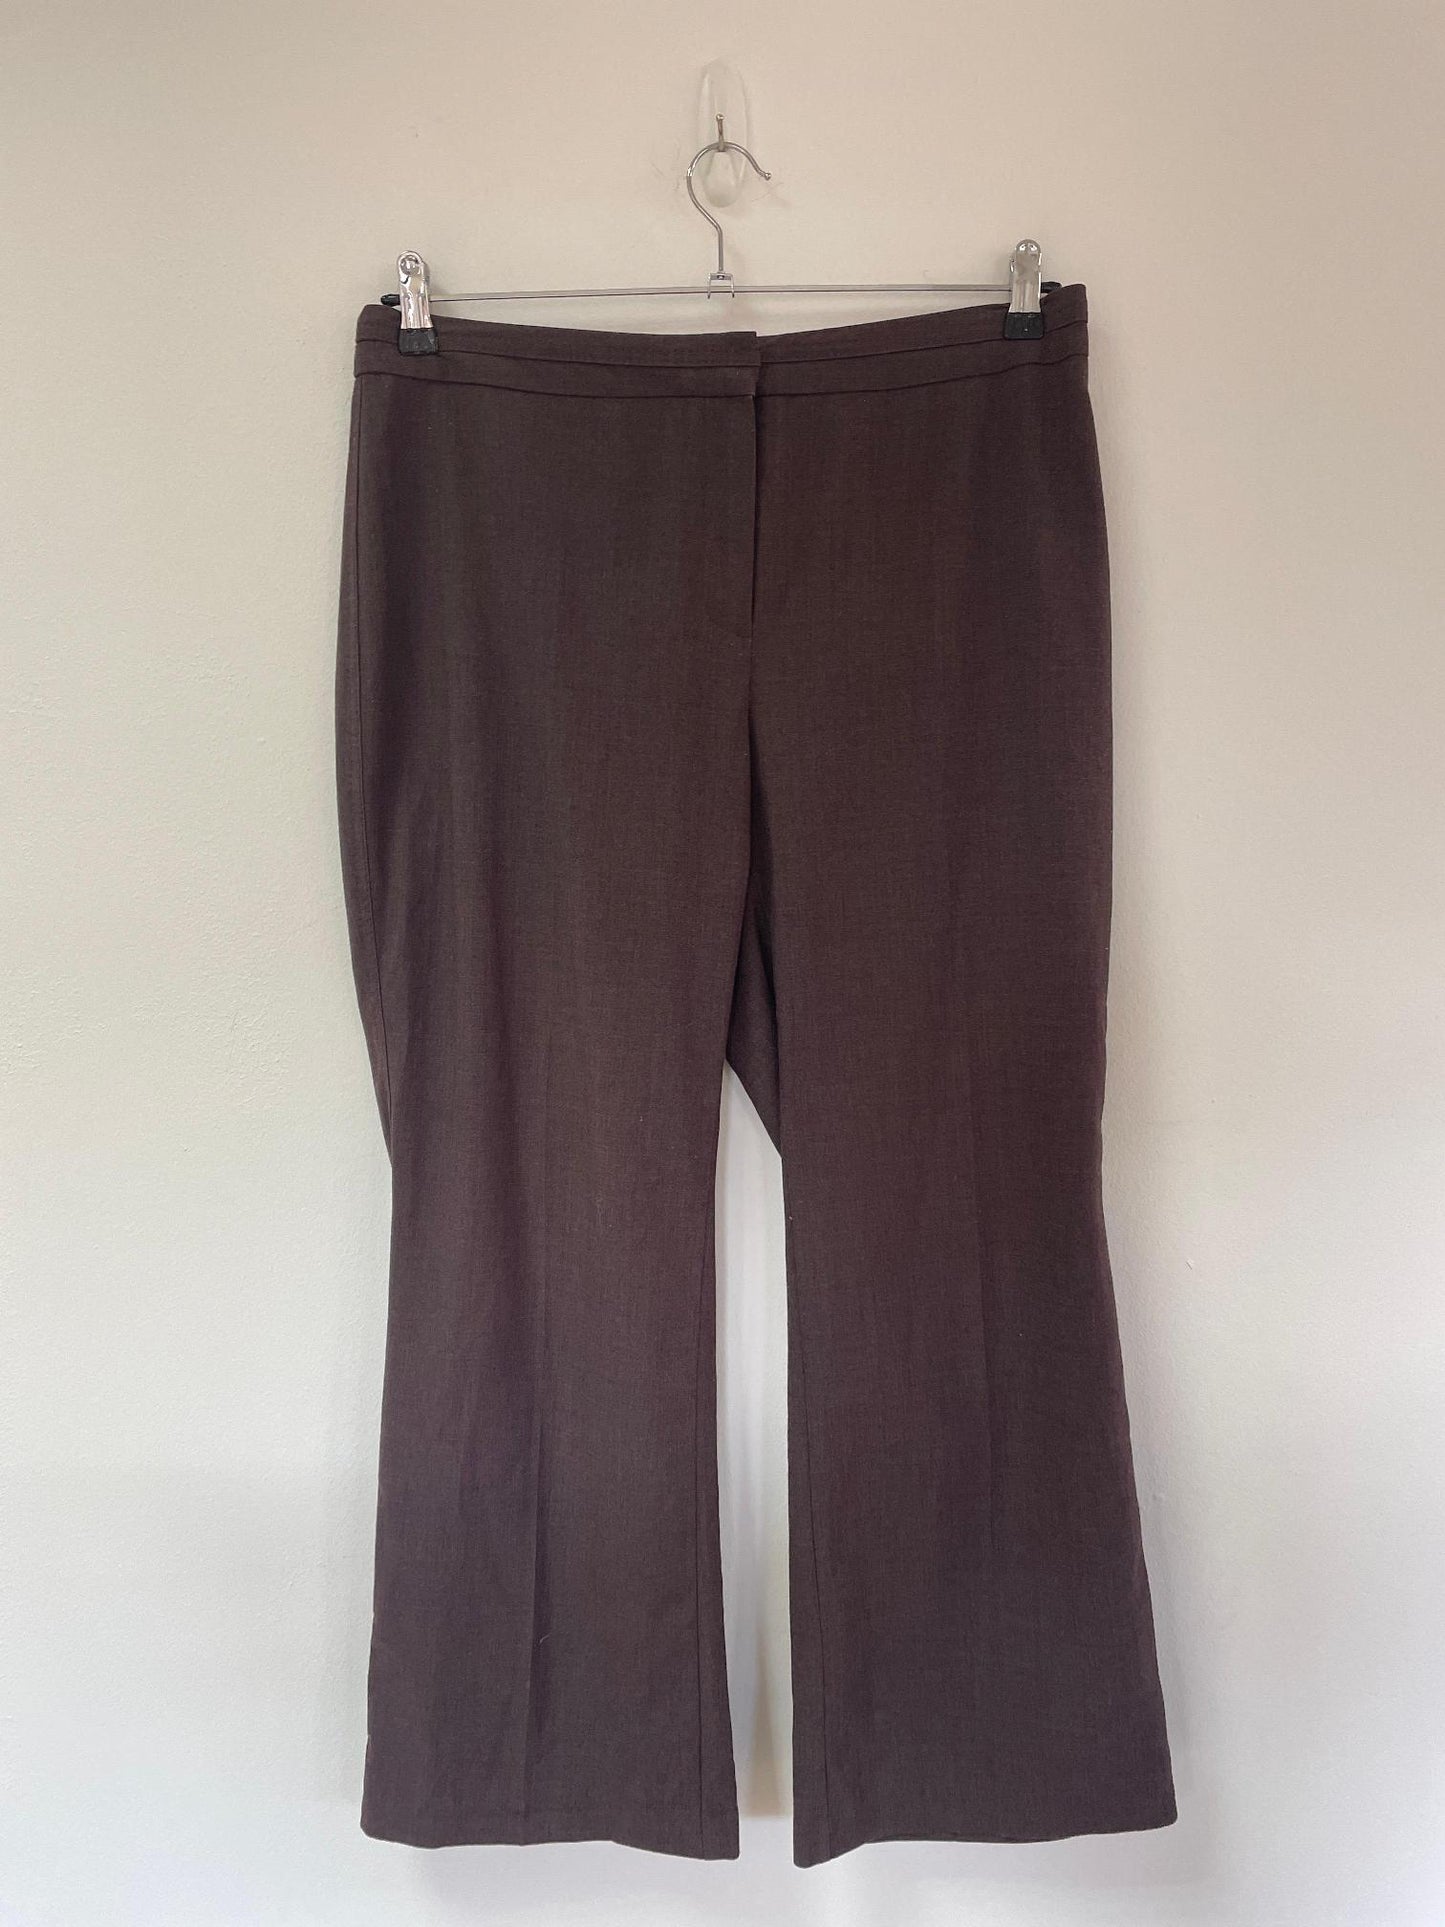 Brown tailored trousers, M&S, Size 16 Petite - Damaged Item Sale